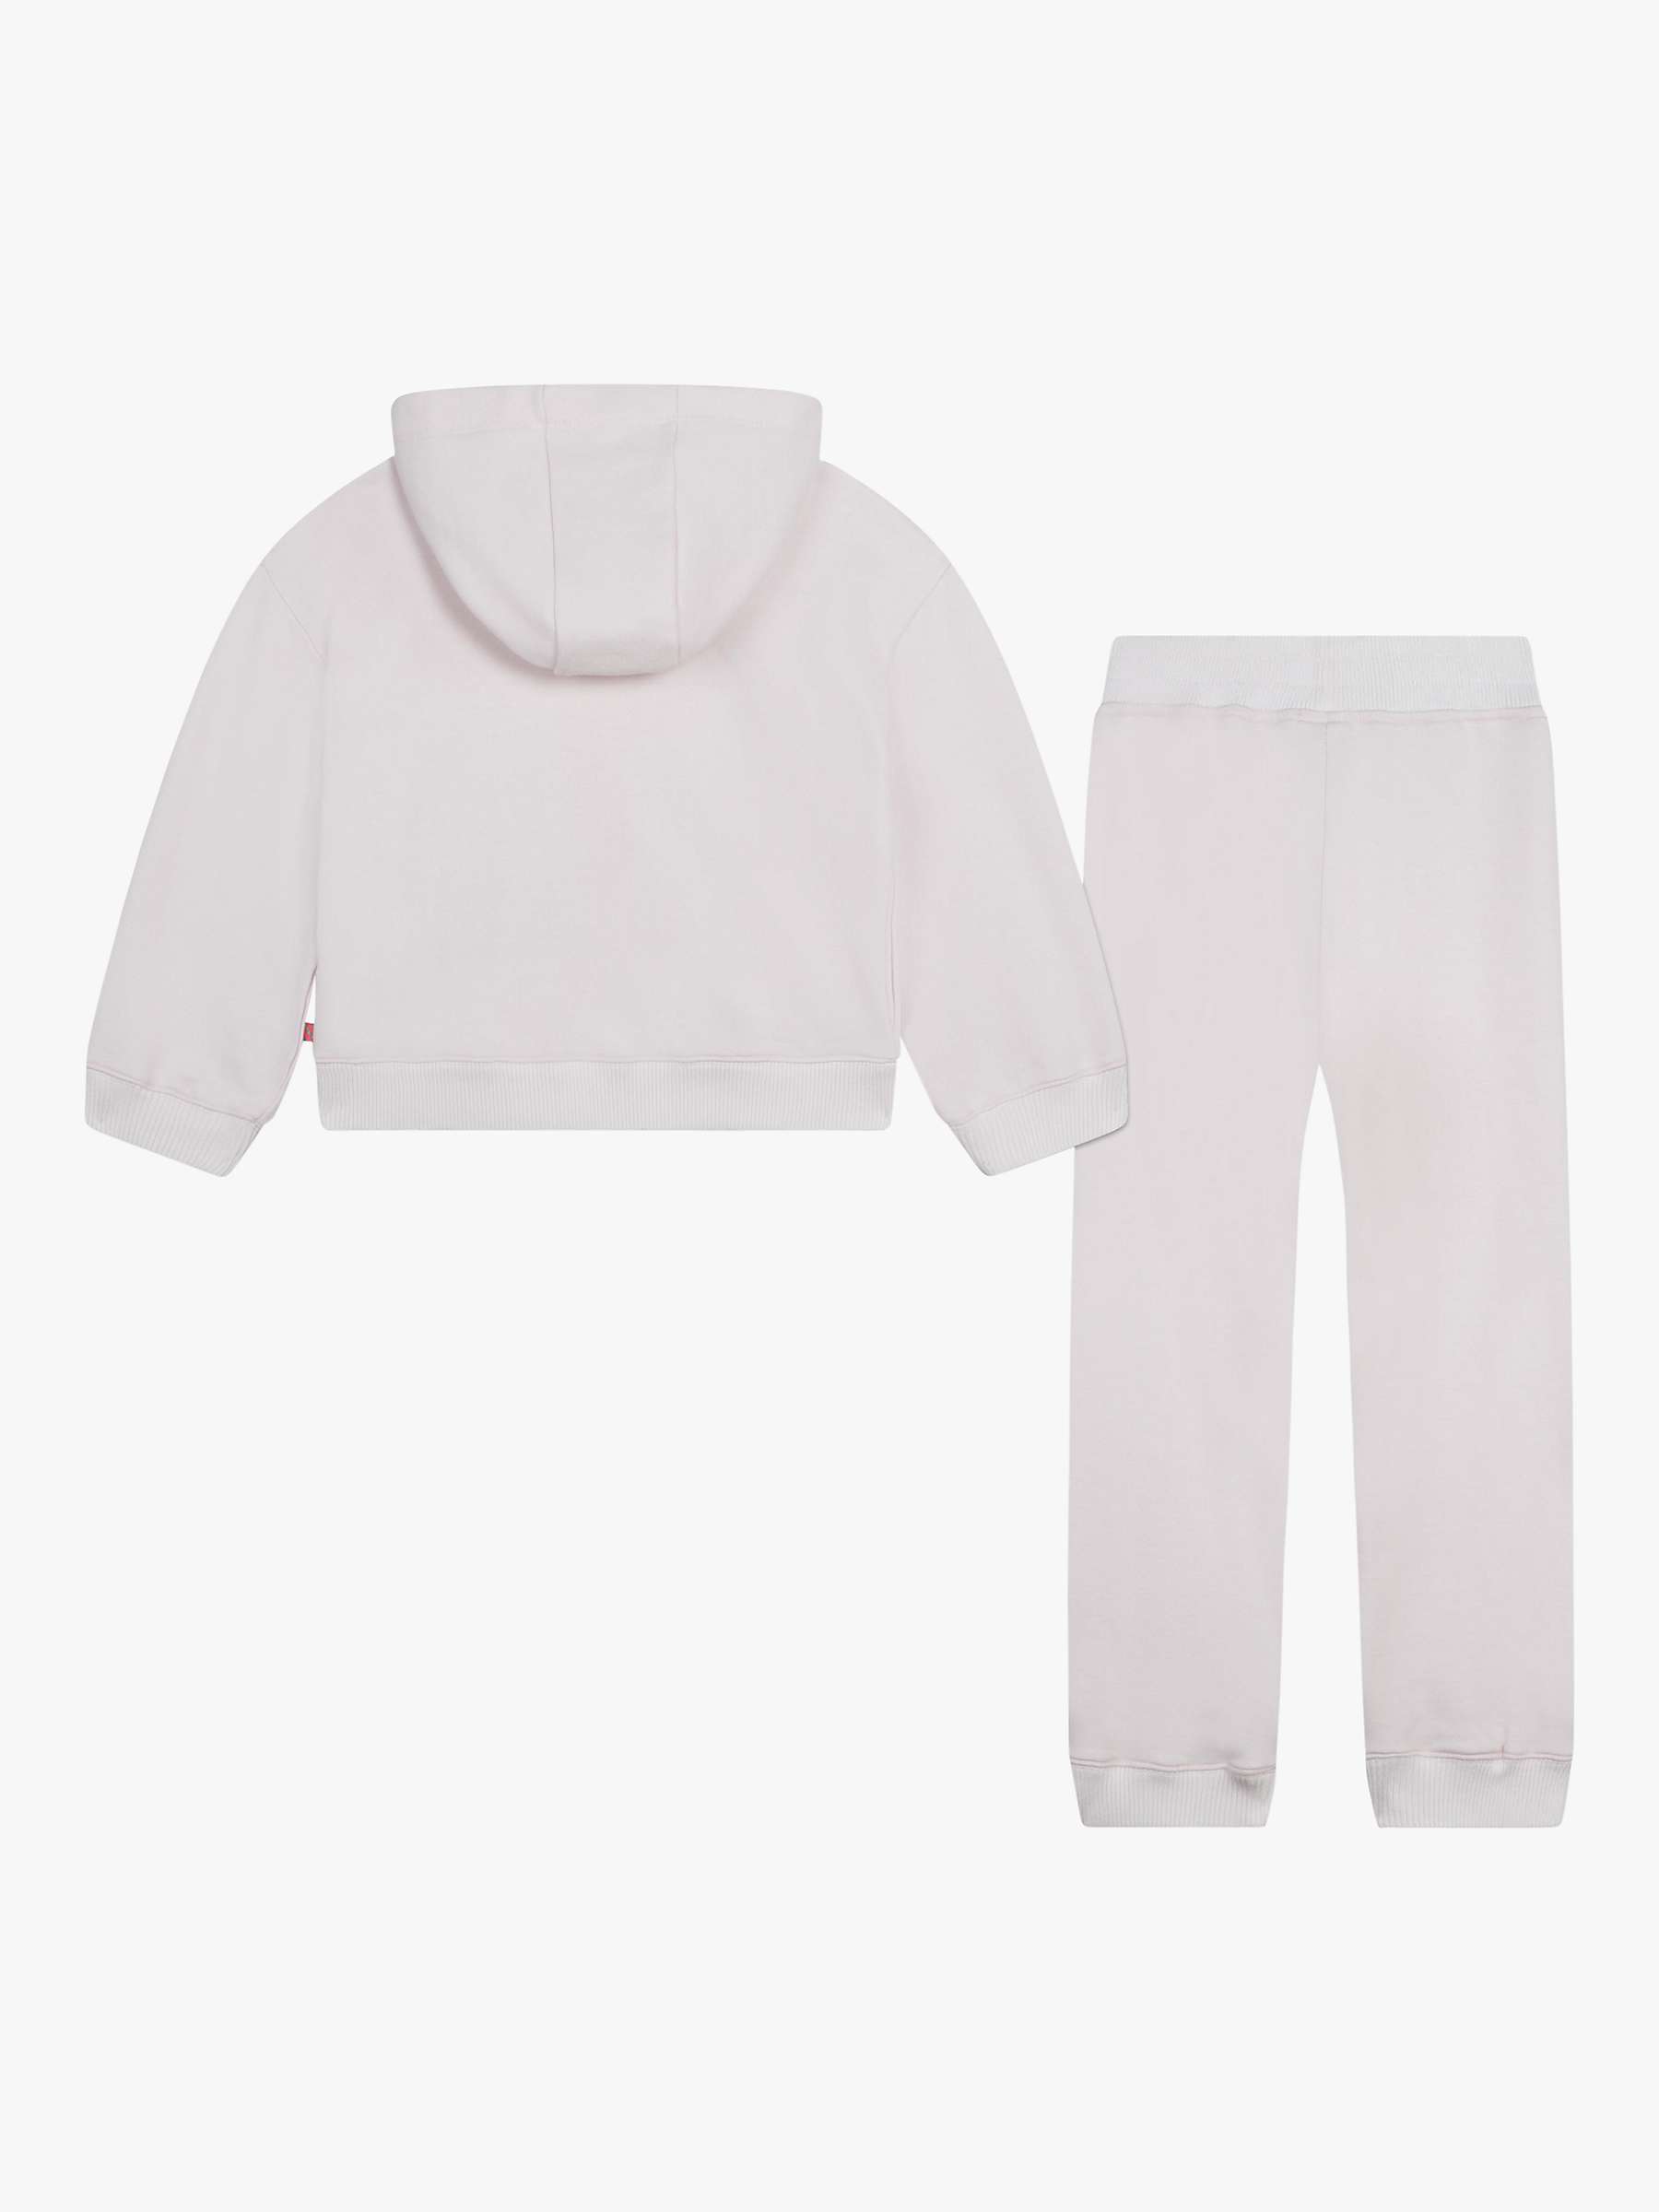 Buy Billieblush Kids' French Terry Hooded Tracksuit Set, Light Pink Online at johnlewis.com